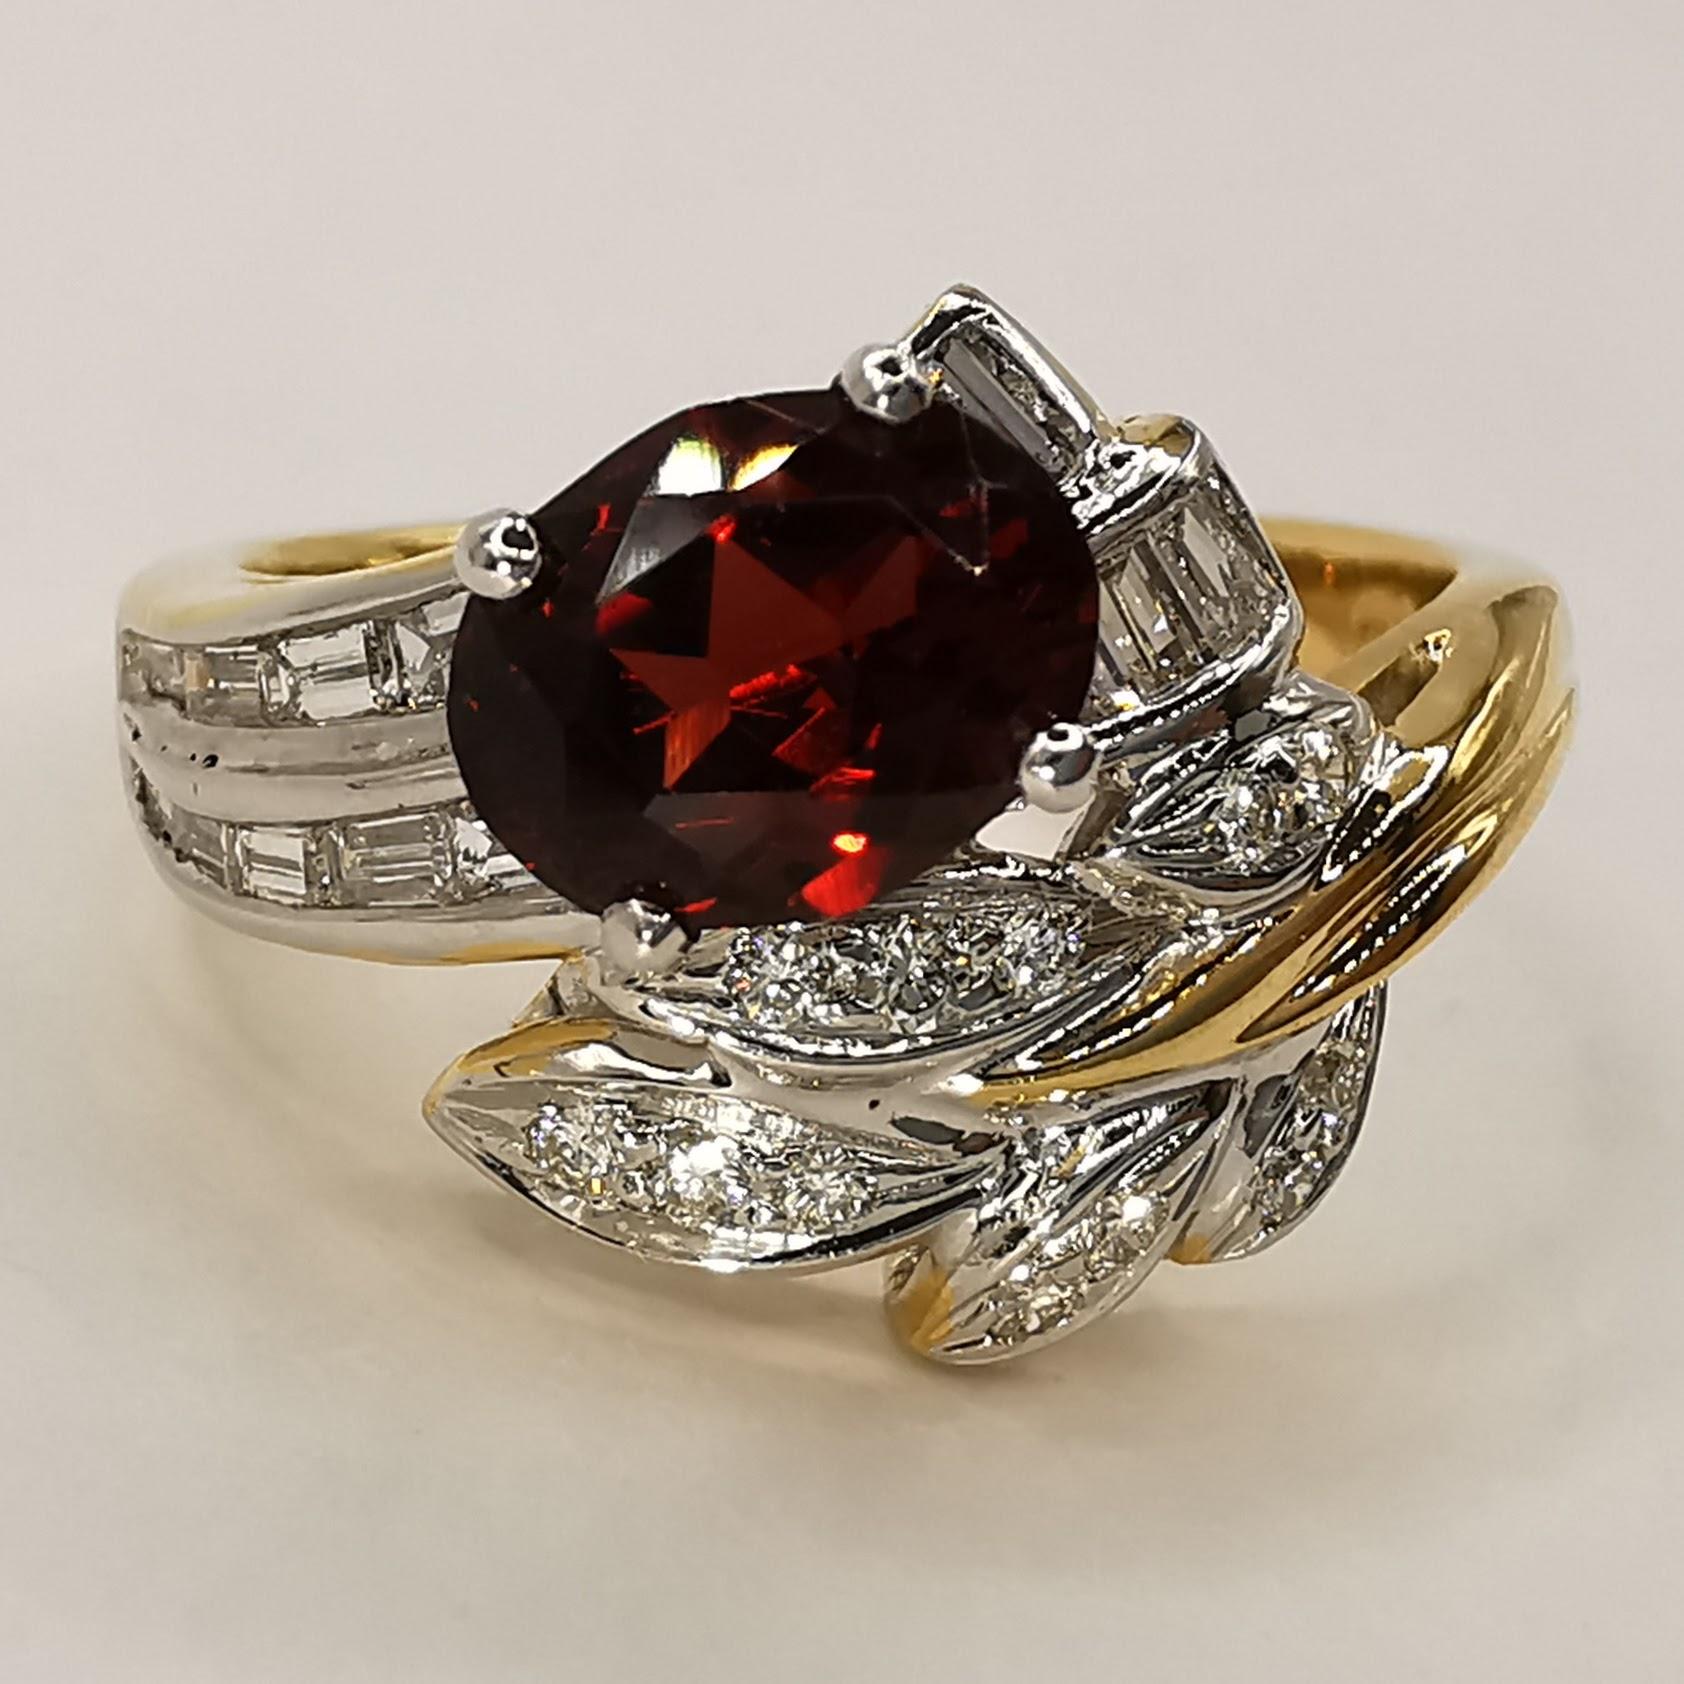 This IGI certified natural oval orangy red garnet diamond ring in yellow gold is a stunning piece of jewelry that is sure to turn heads. The centerpiece of the ring is a beautiful 1.21 carat natural oval cut deep orangy red pyrope-almandite garnet.